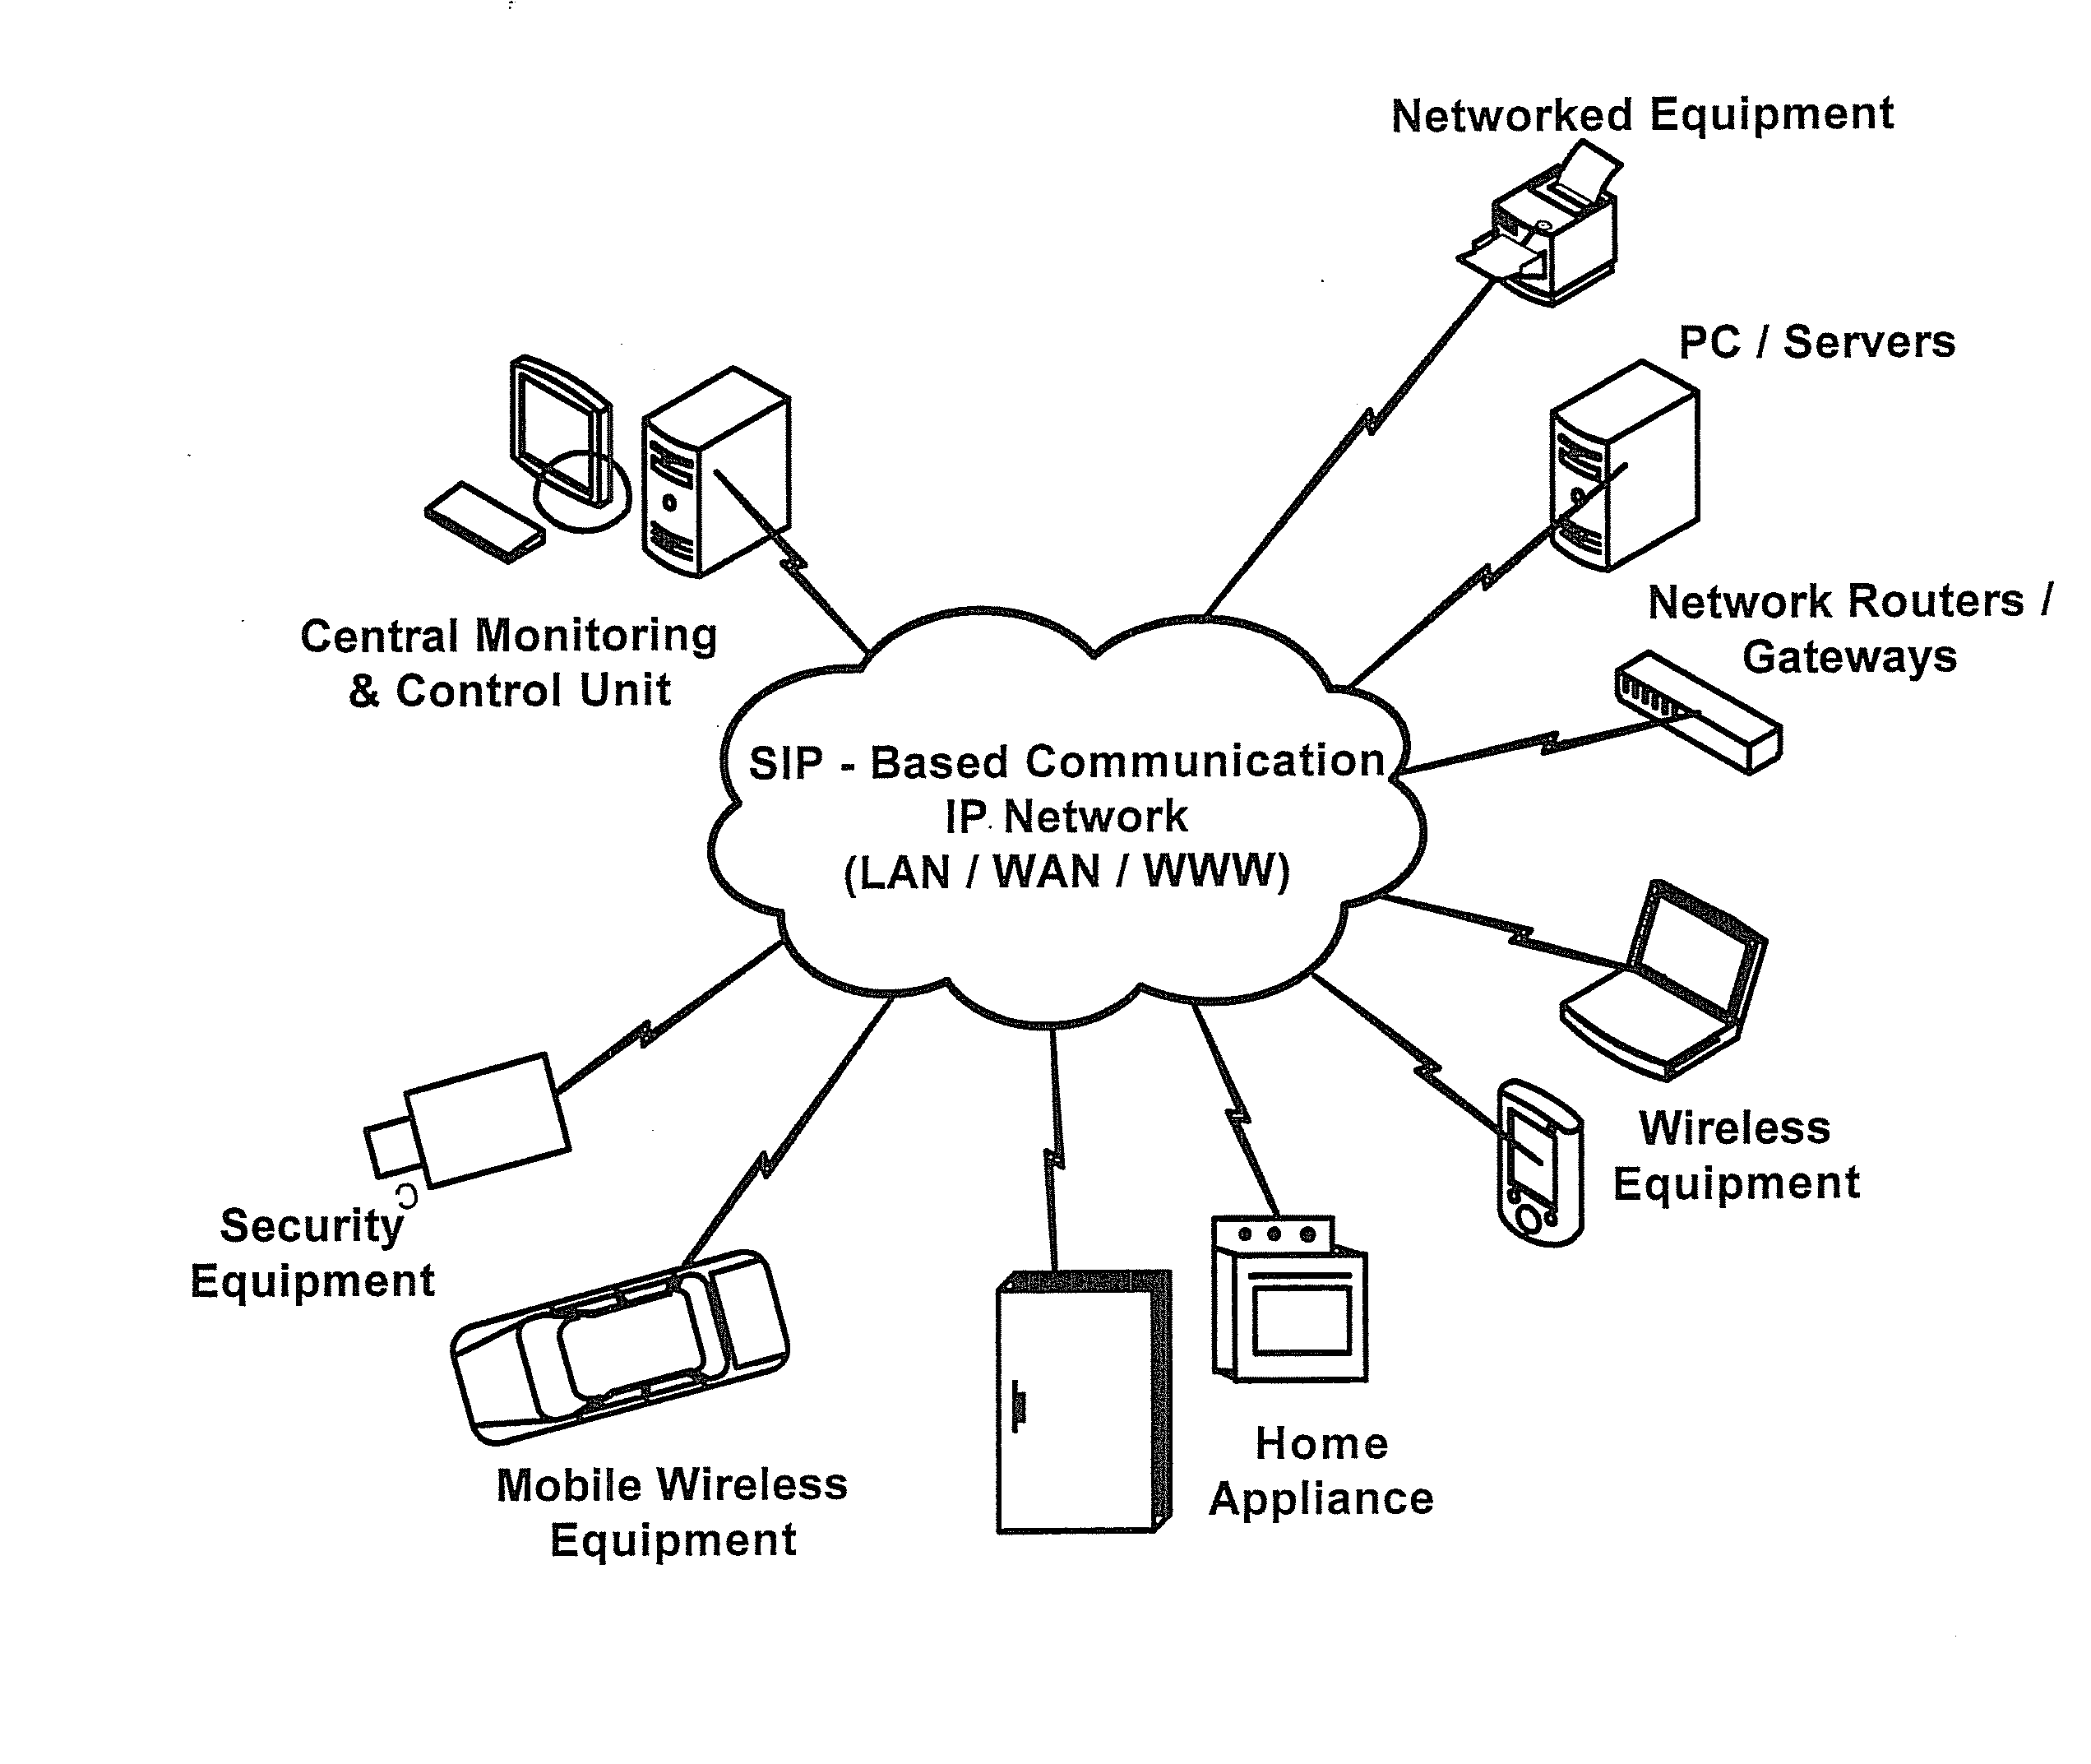 Method and system for controlling and monitoring an apparatus from a remote computer using session initiation protocol (SIP)